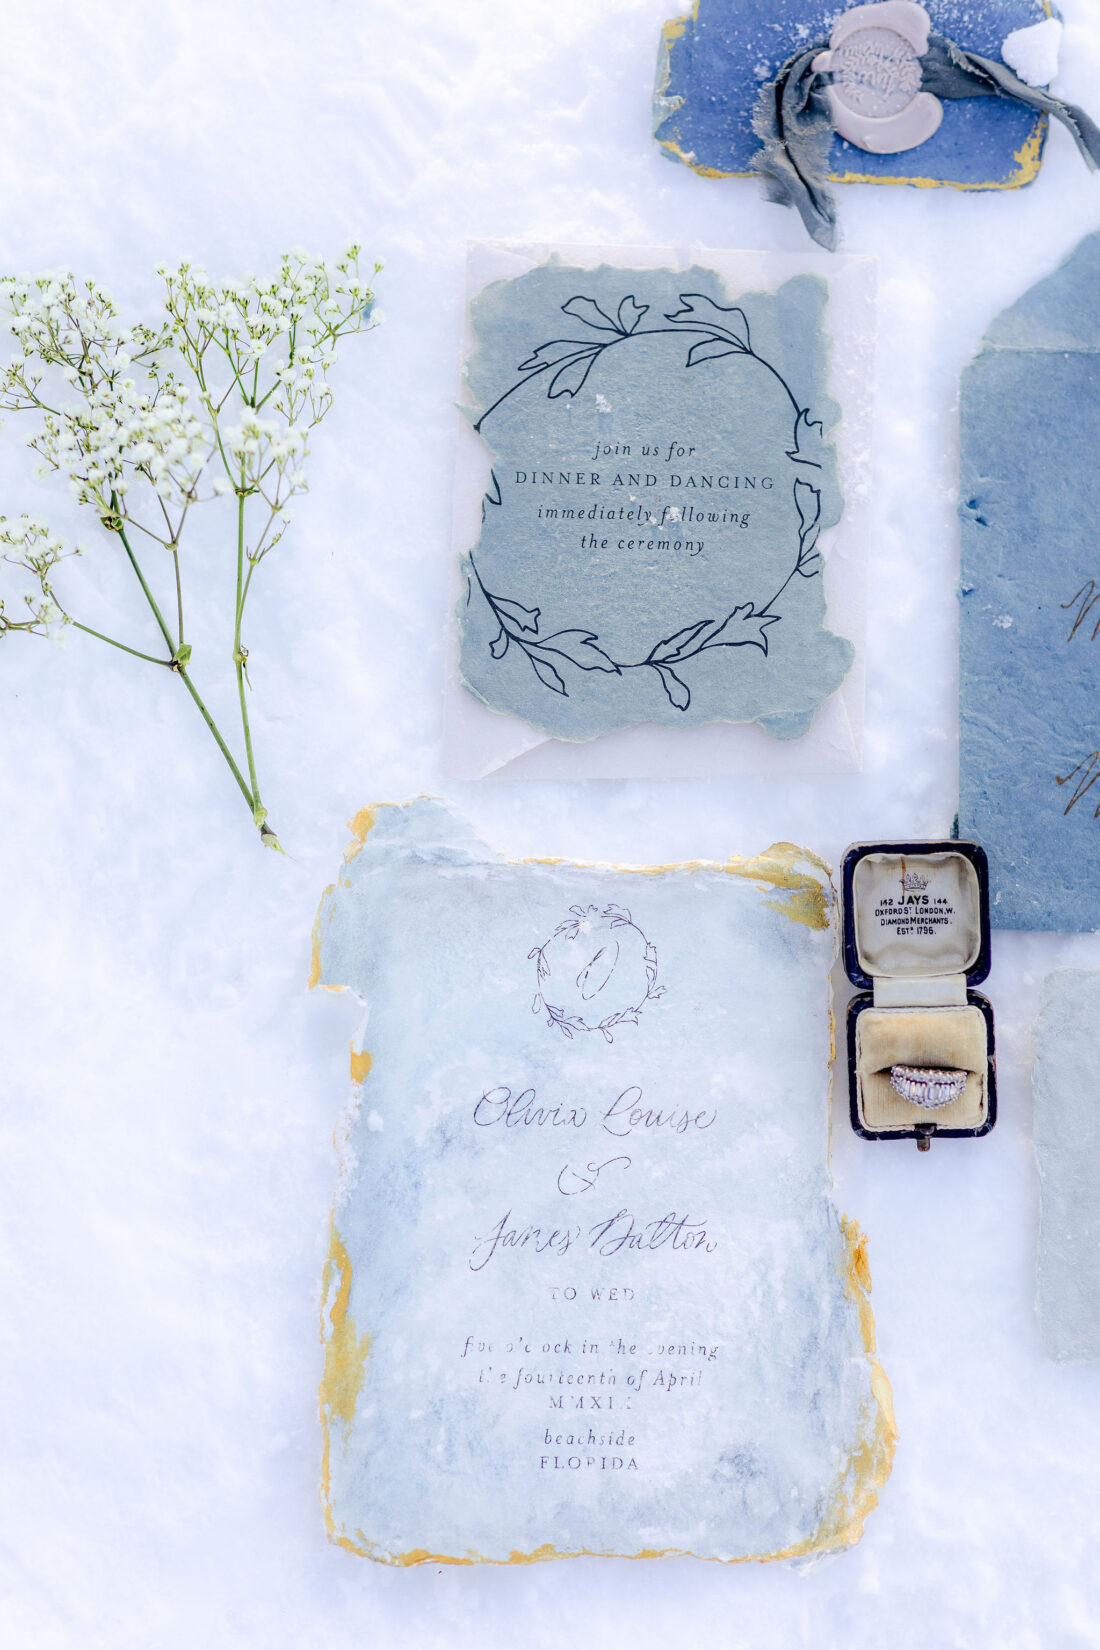 invitation with ring in box laying in snow